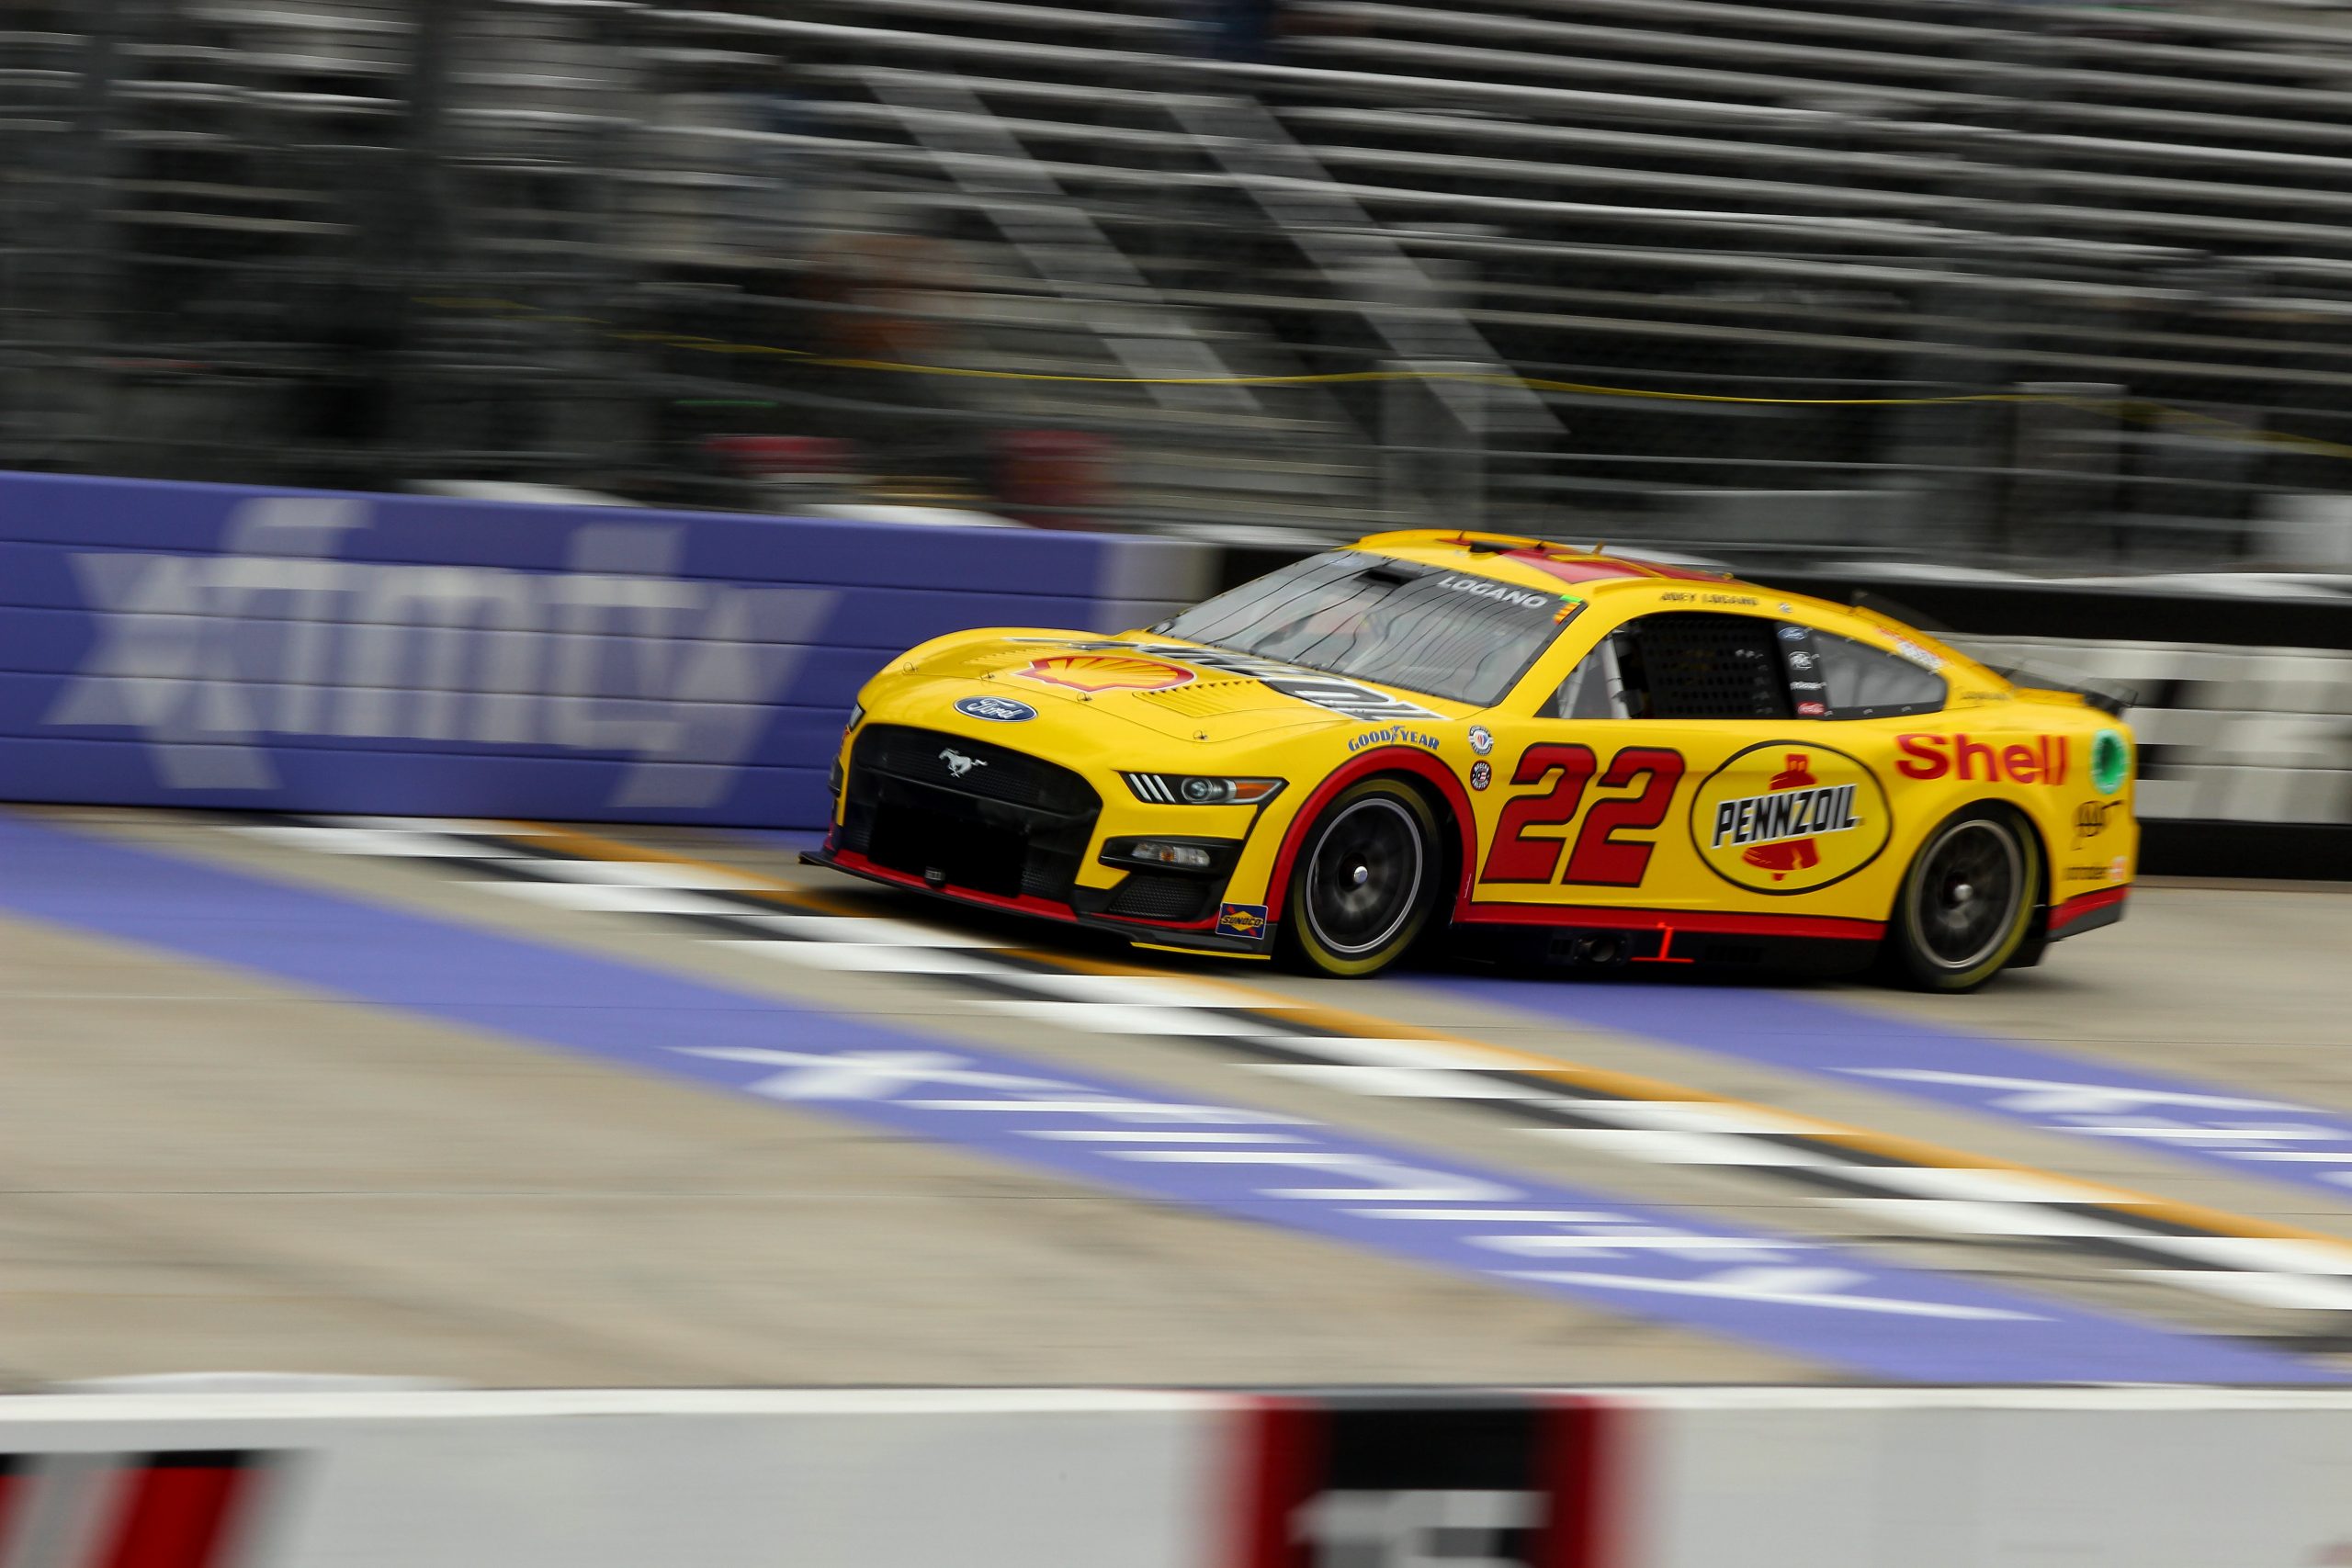 Logano expects the track conditions to change or evolve once more rubber is on the concrete surface at Dover. (Photo: Josh Jones | The Podium Finish)